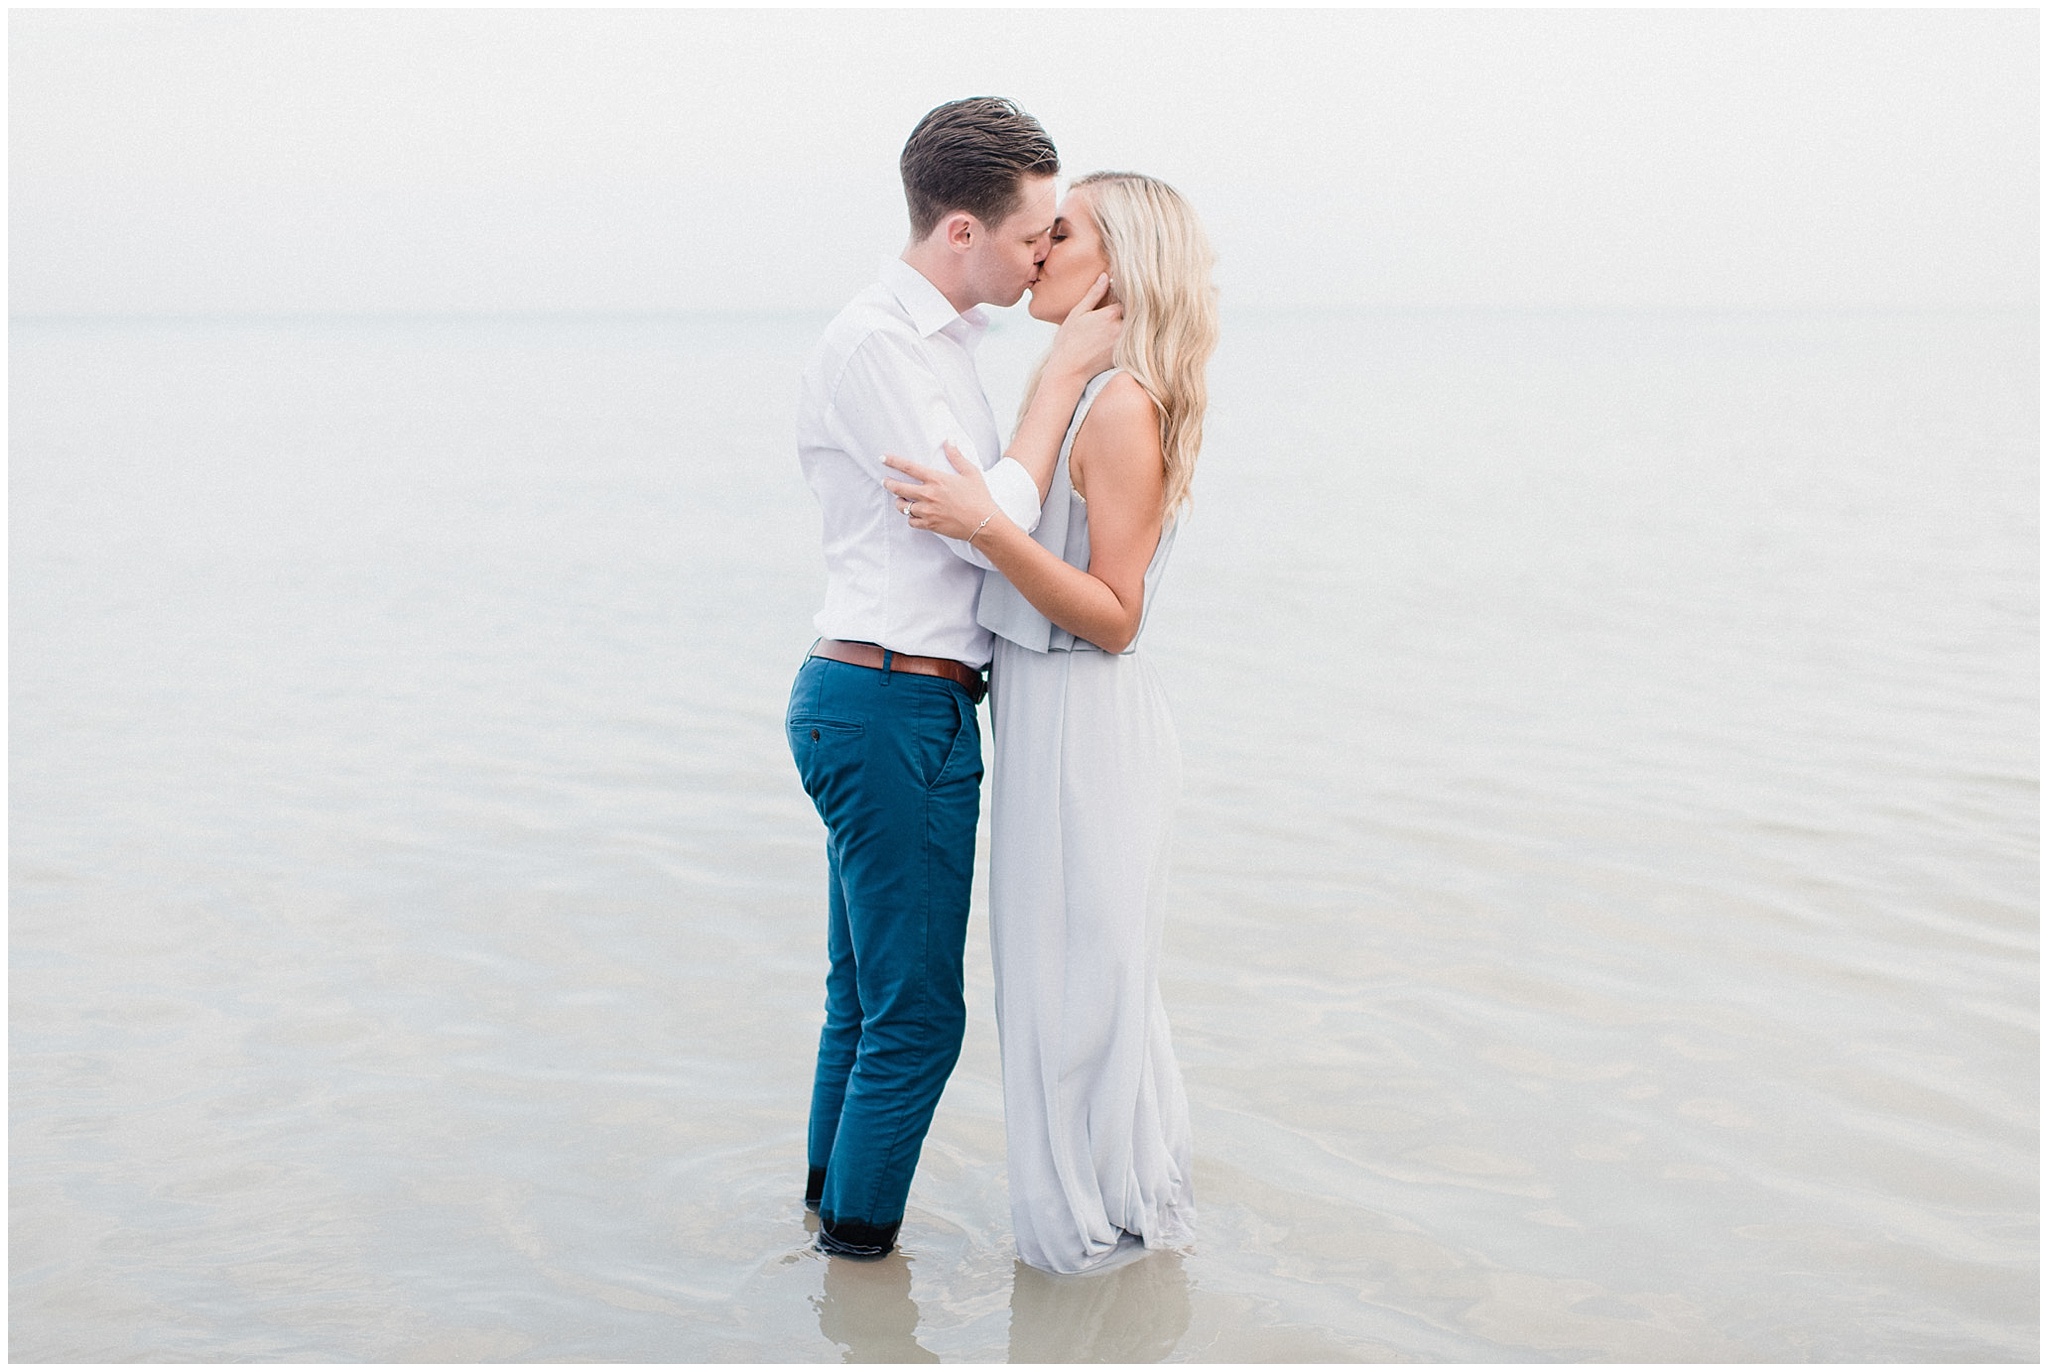 What to Wear for your Engagement Photos | Elegant Scarborough Bluffs Engagement Session by Jenn Kavanagh Photography